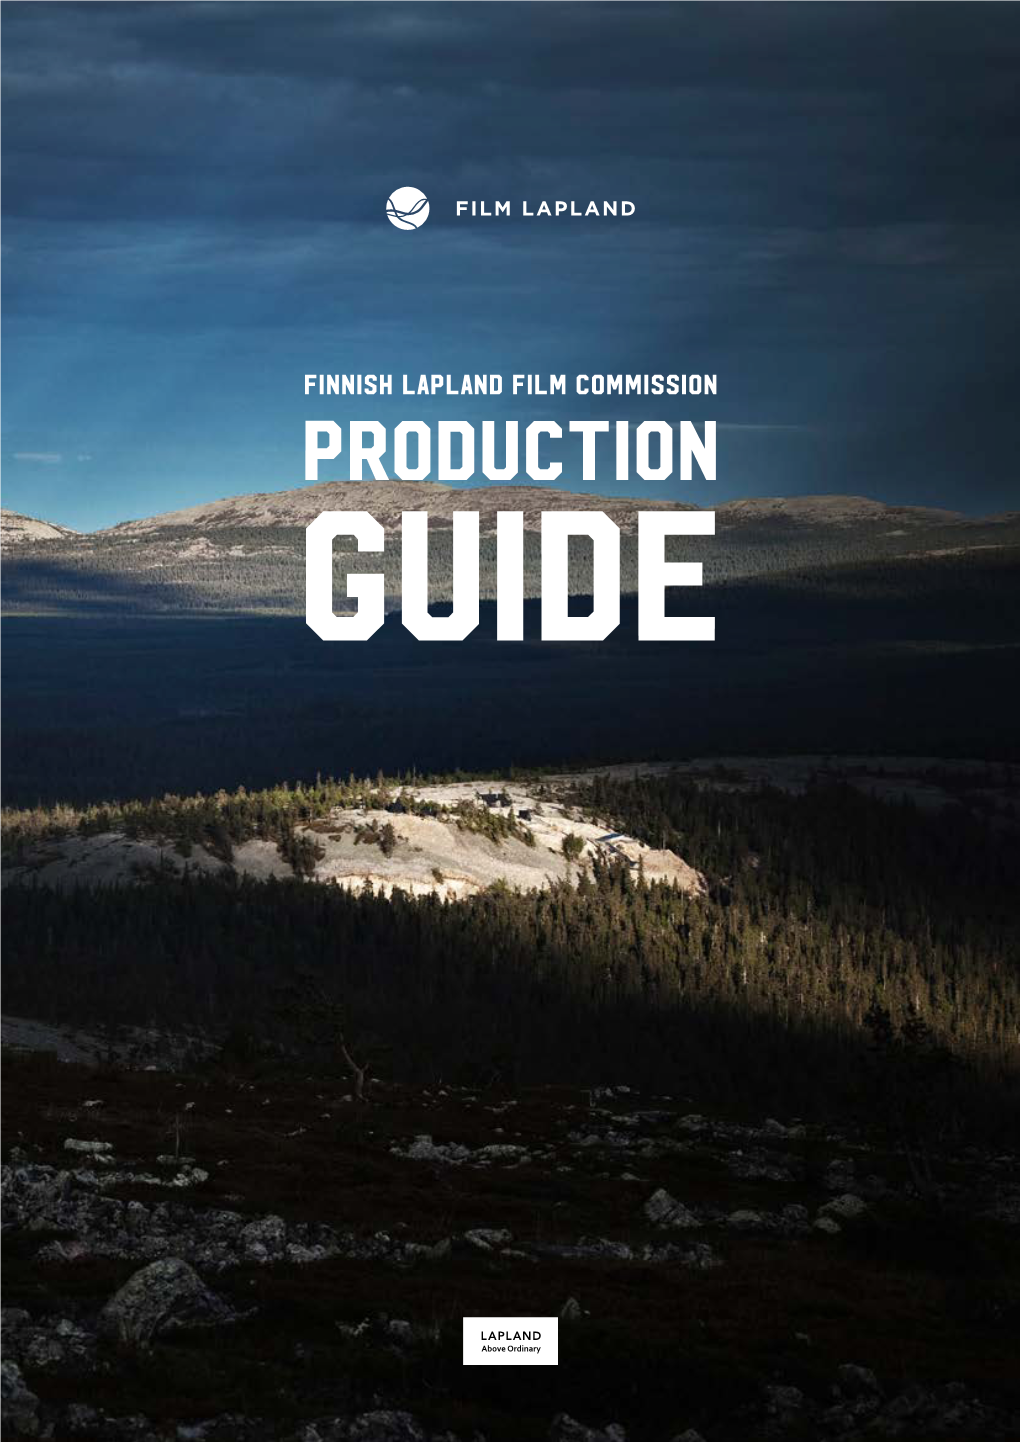 Finnish Lapland Film Commission Production Guide Table of Contents